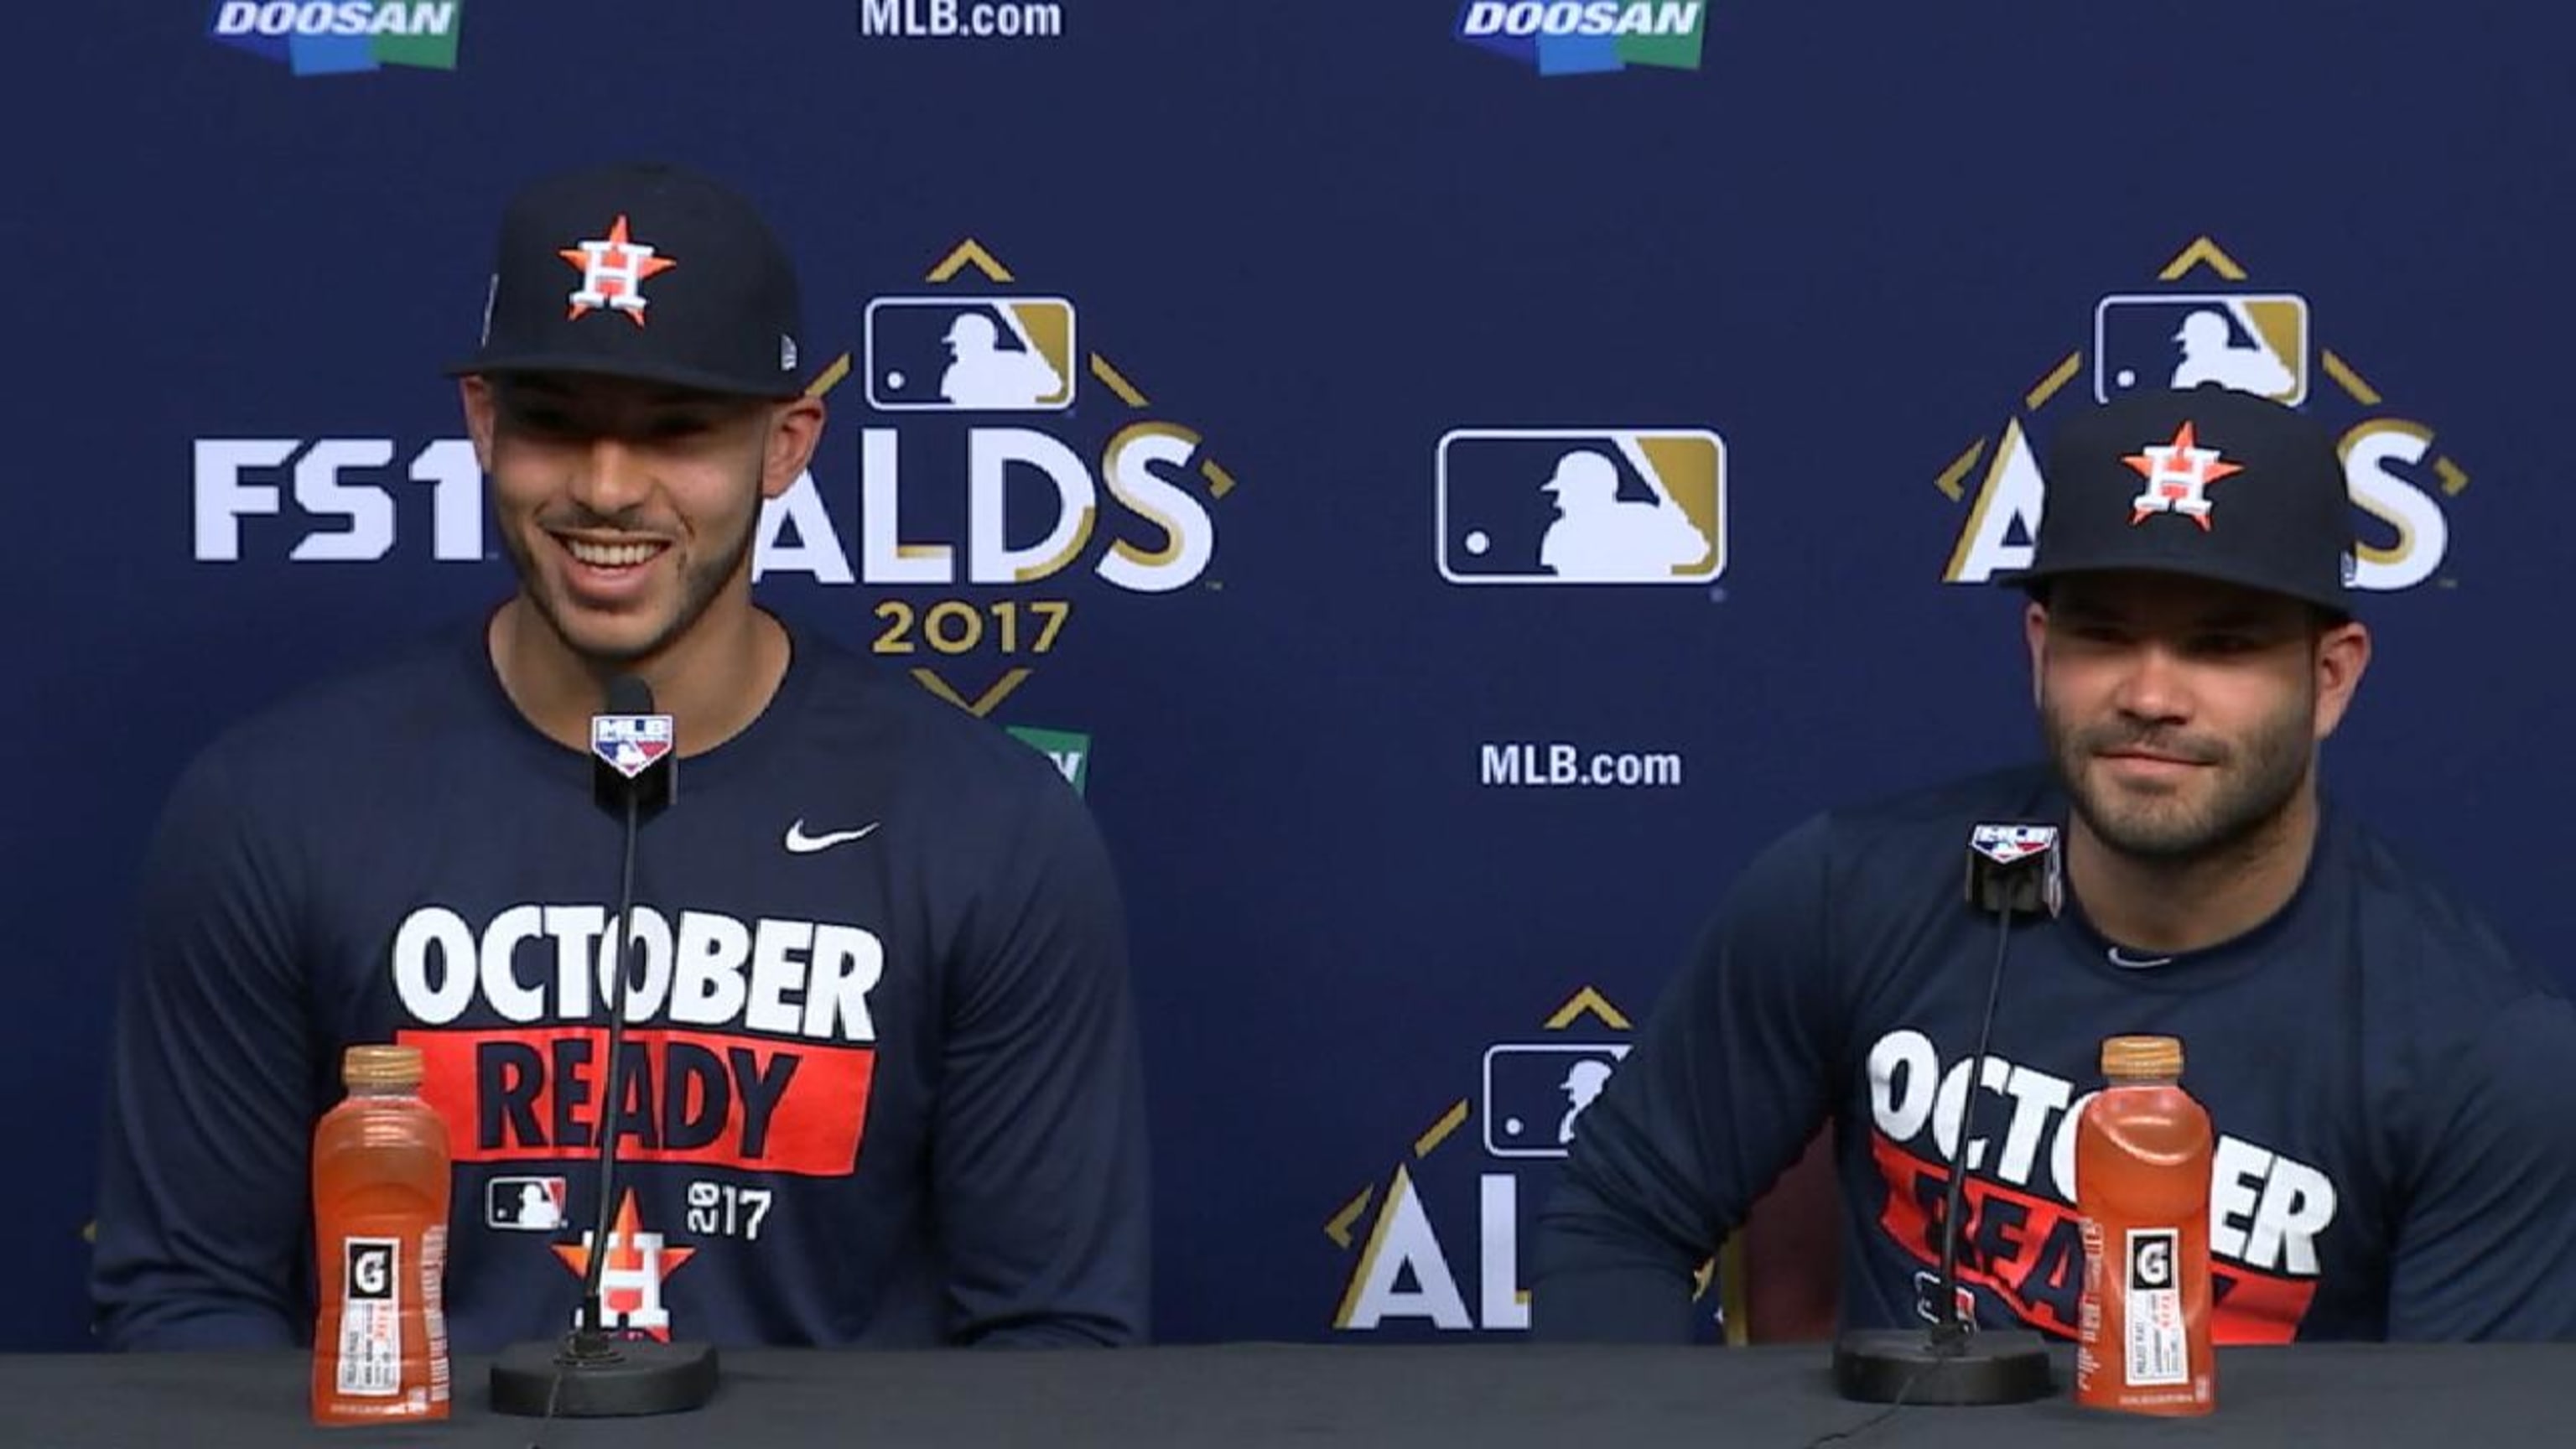 Jose Altuve and Carlos Correa confirm they're the two best friends